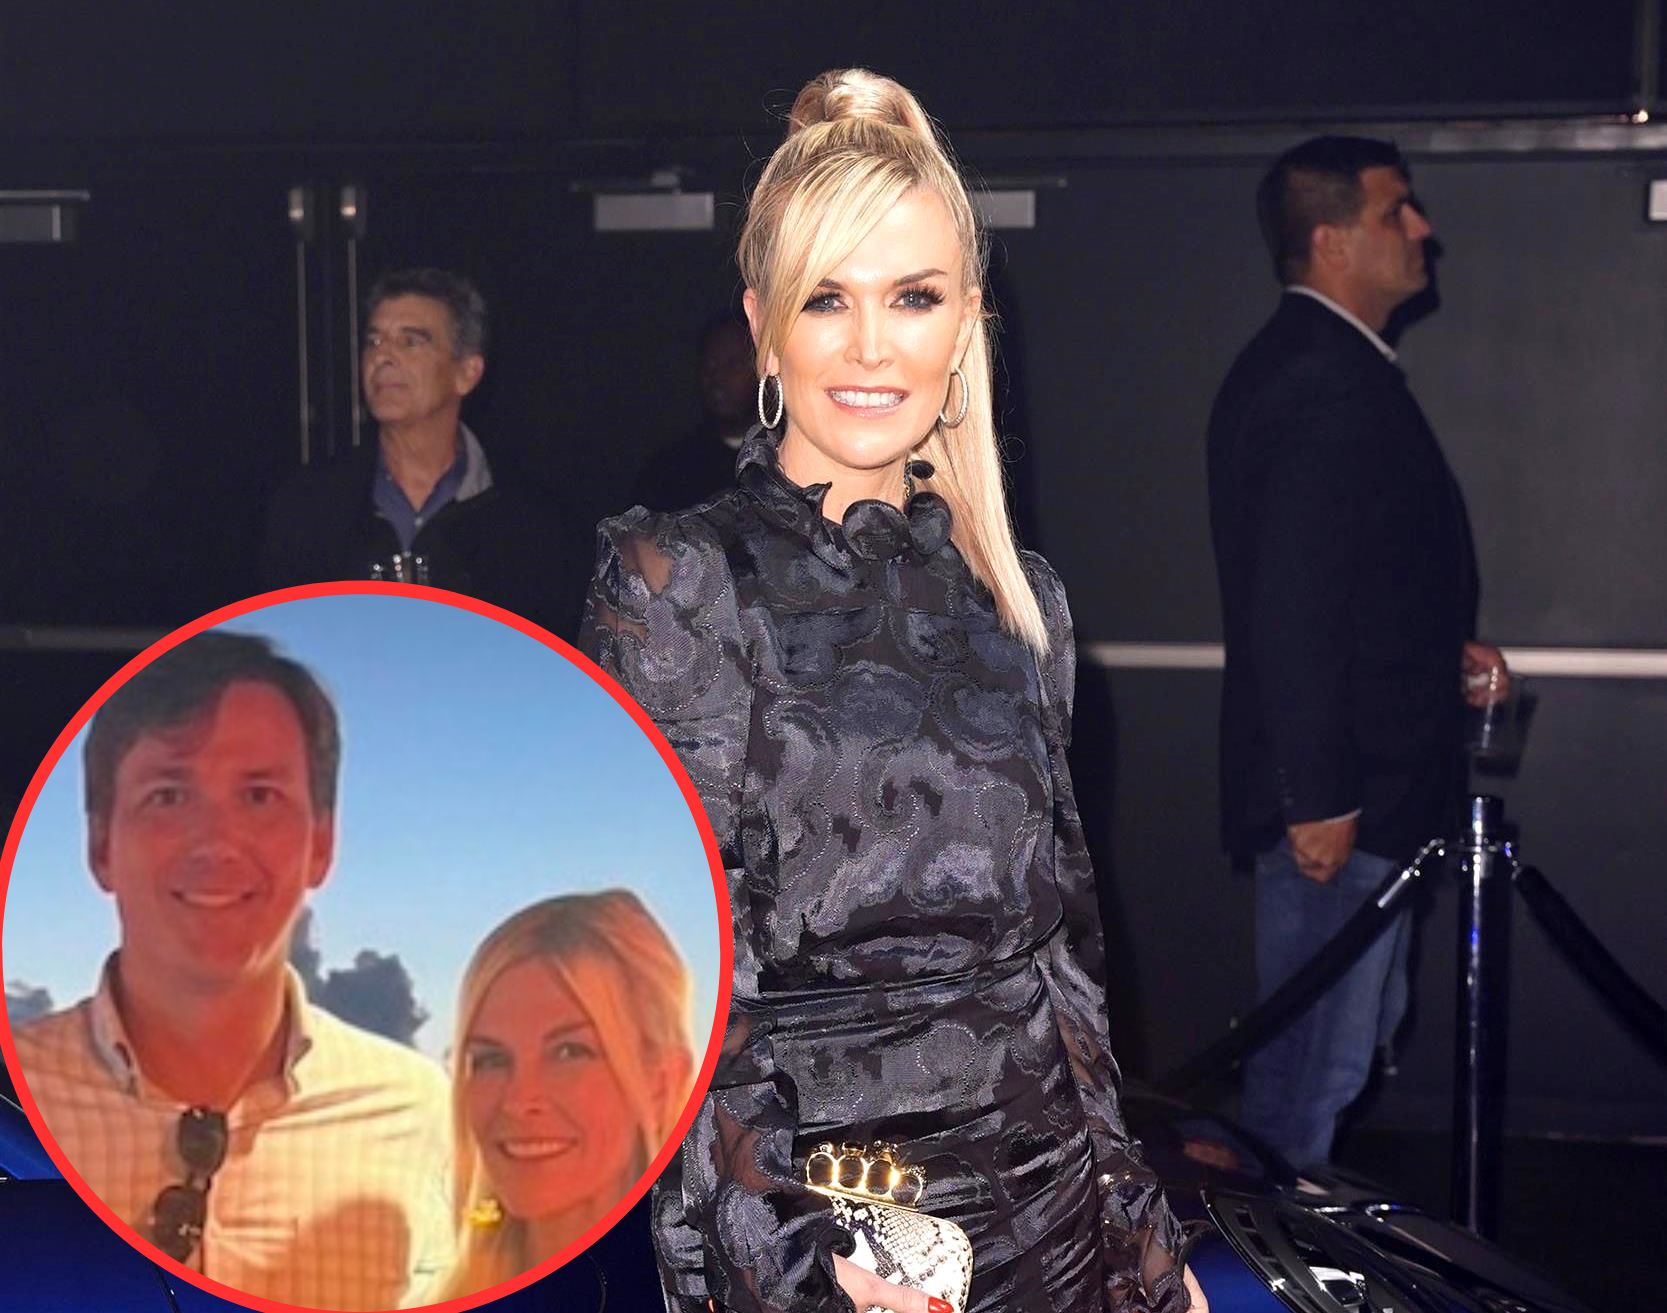 PHOTO: RHONY's Tinsley Mortimer Flaunts $500,000 Engagement Ring From Fiancé Robert Bovard Ahead of November Wedding in Florida